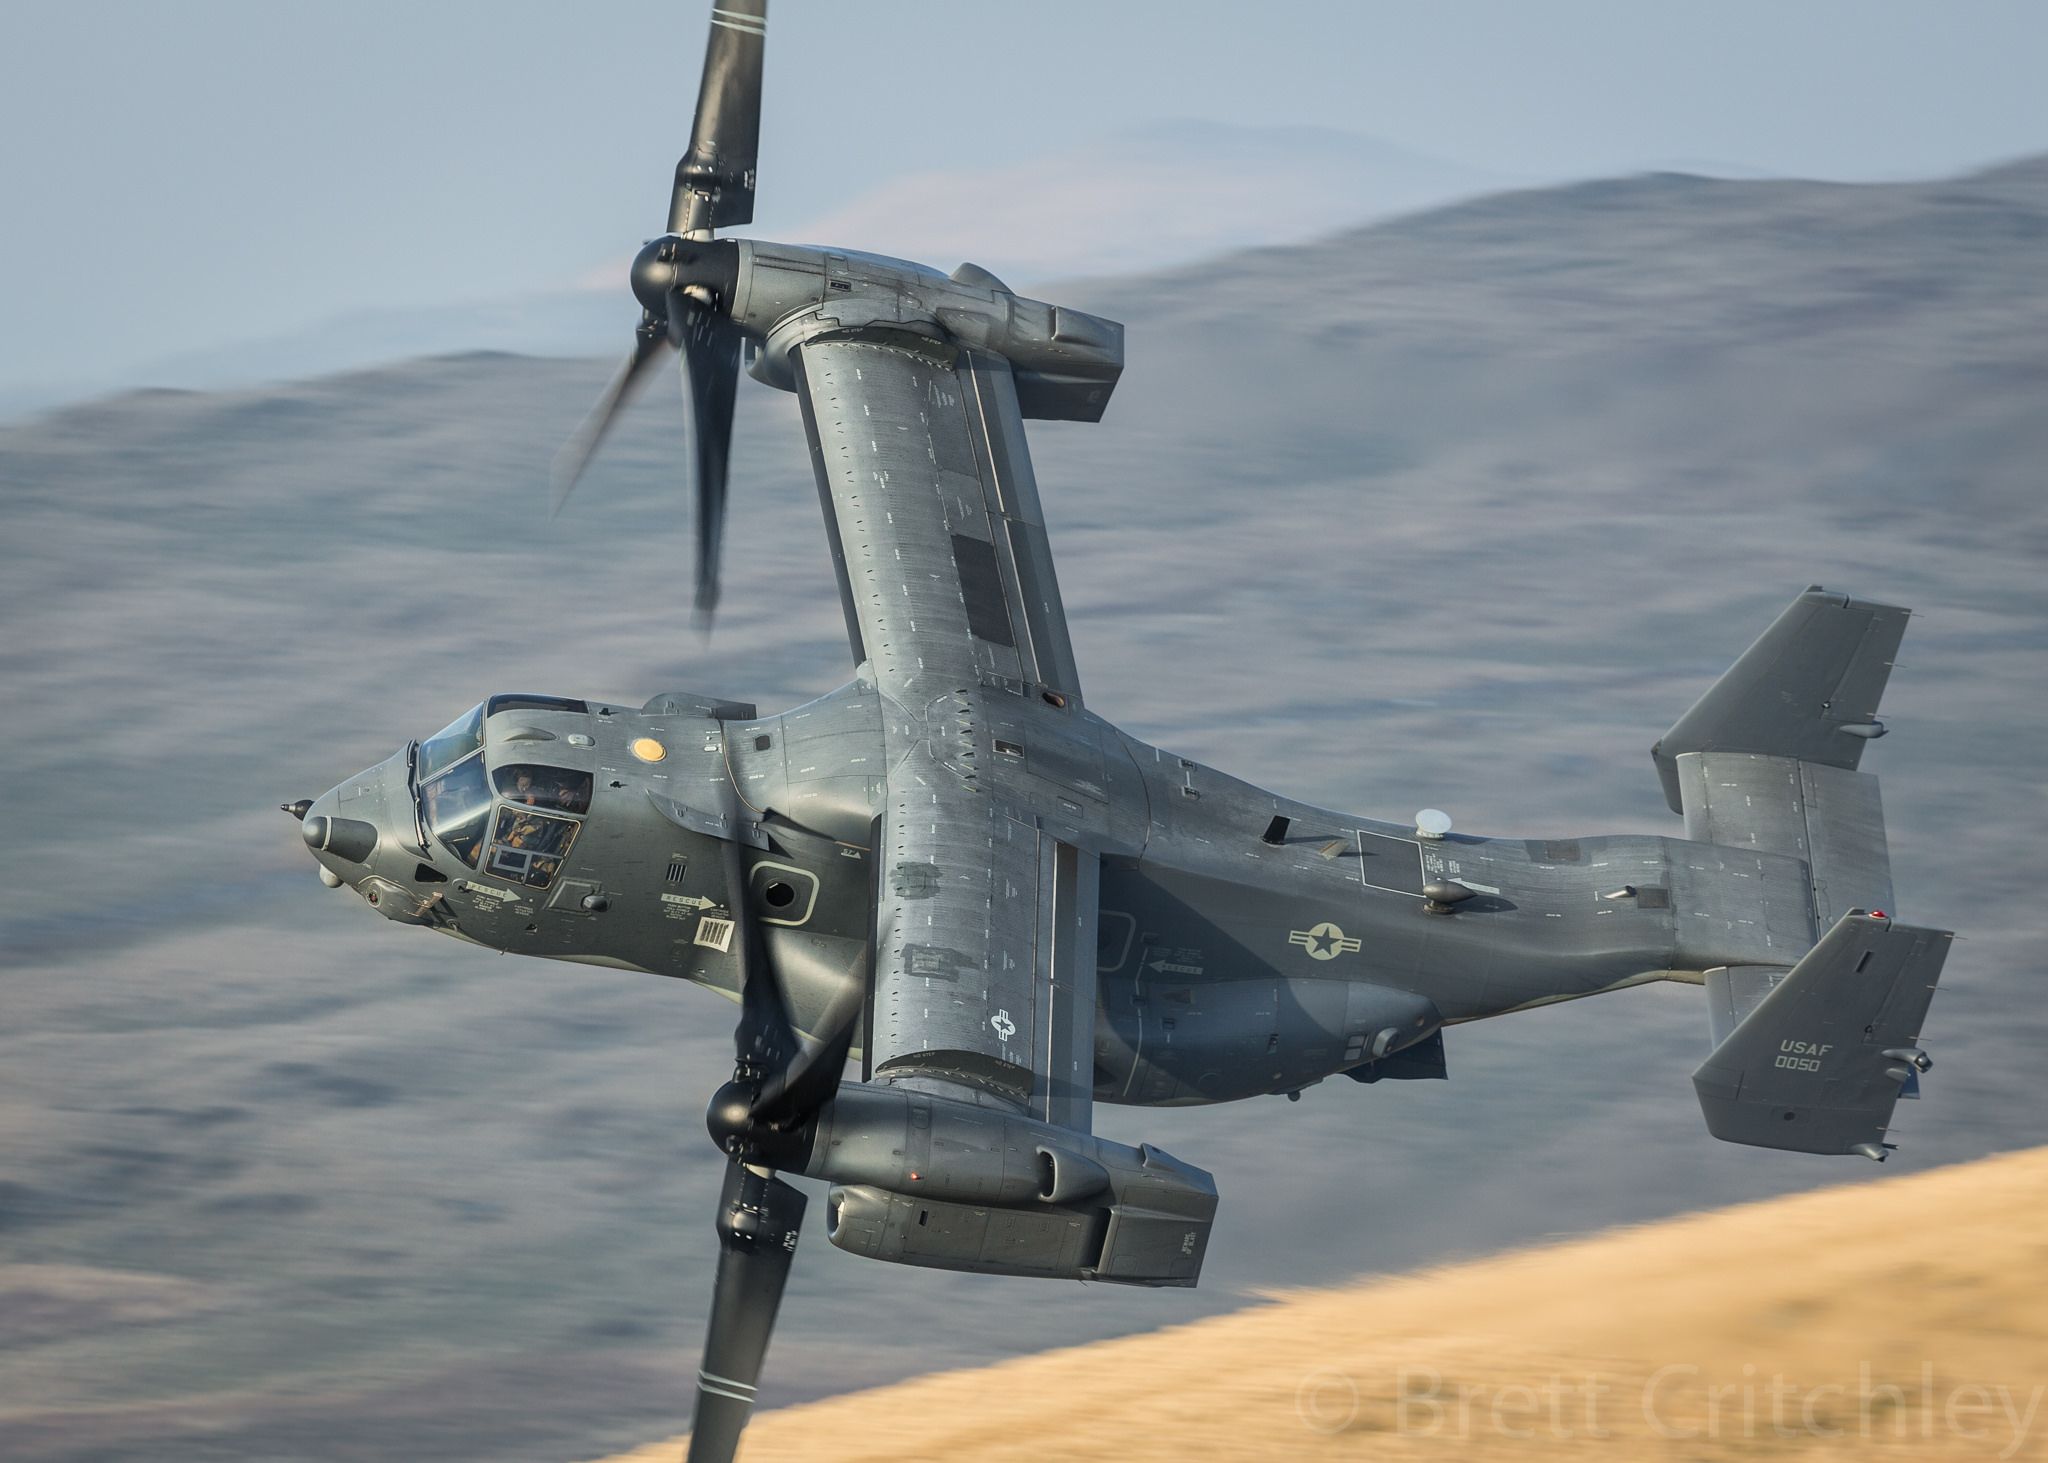 Bell Boeing CV 22 Osprey. Osprey Helicopter, Military Aircraft, Military Helicopter